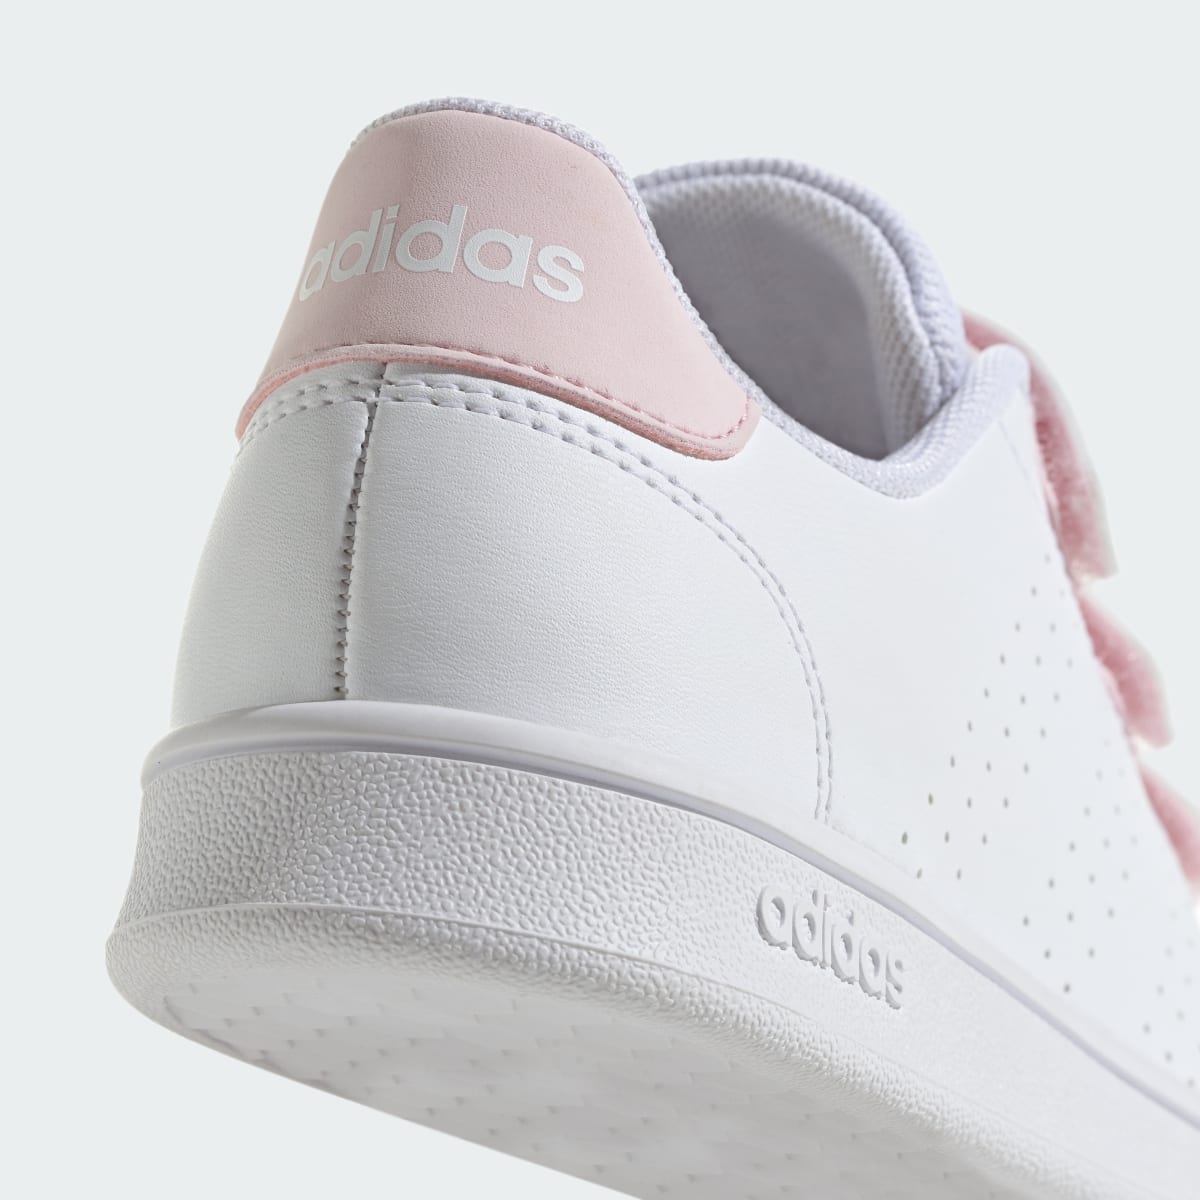 Adidas Advantage Court Lifestyle Hook-and-Loop Shoes. 8